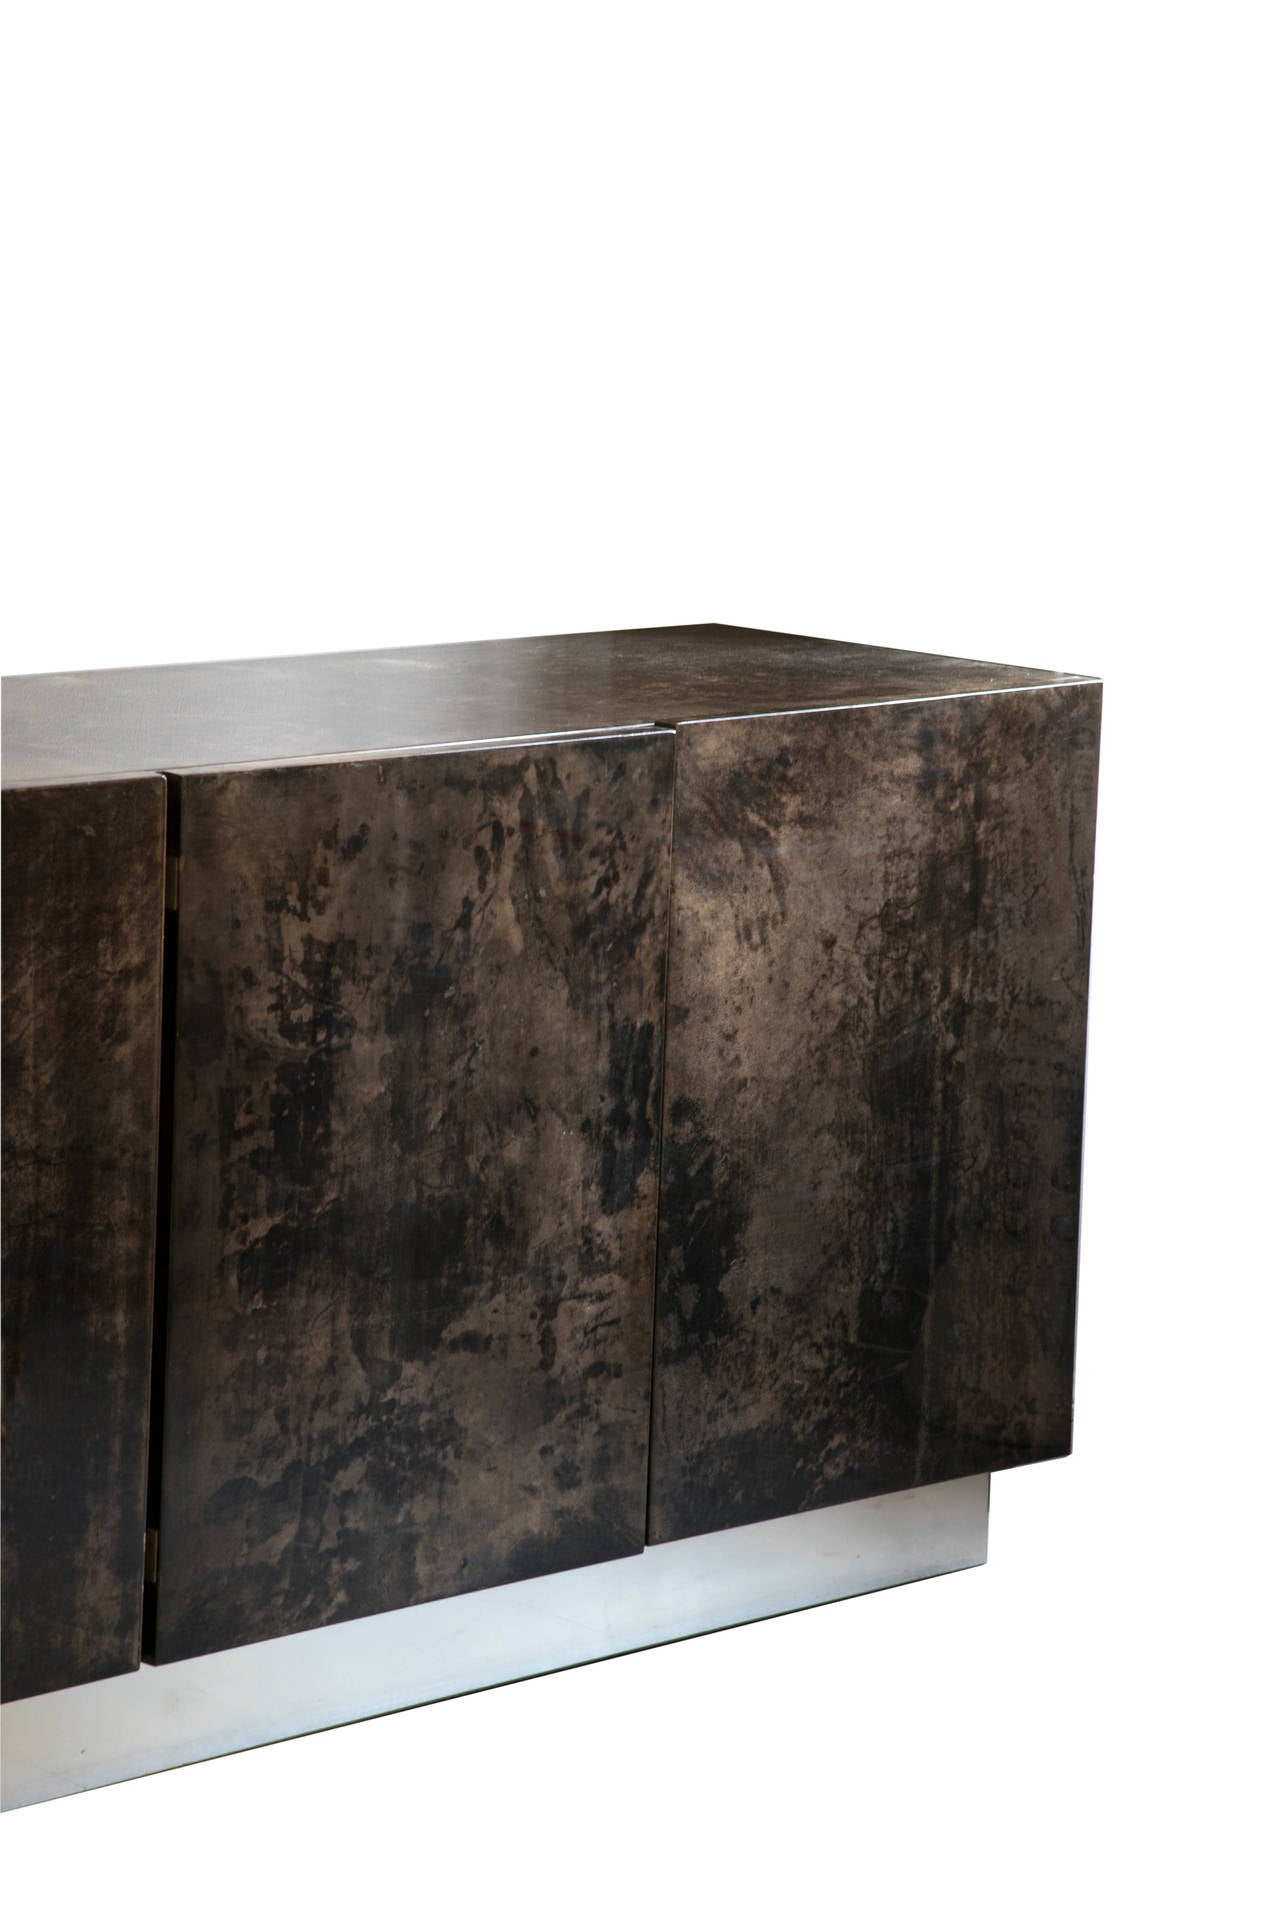 Aldo Tura, lacquered wood and black parchment sideboard,
chrome-plated steel,
circa 1970, Italy.
Measures: Height 81 cm, width 212 cm, depth 50 cm.